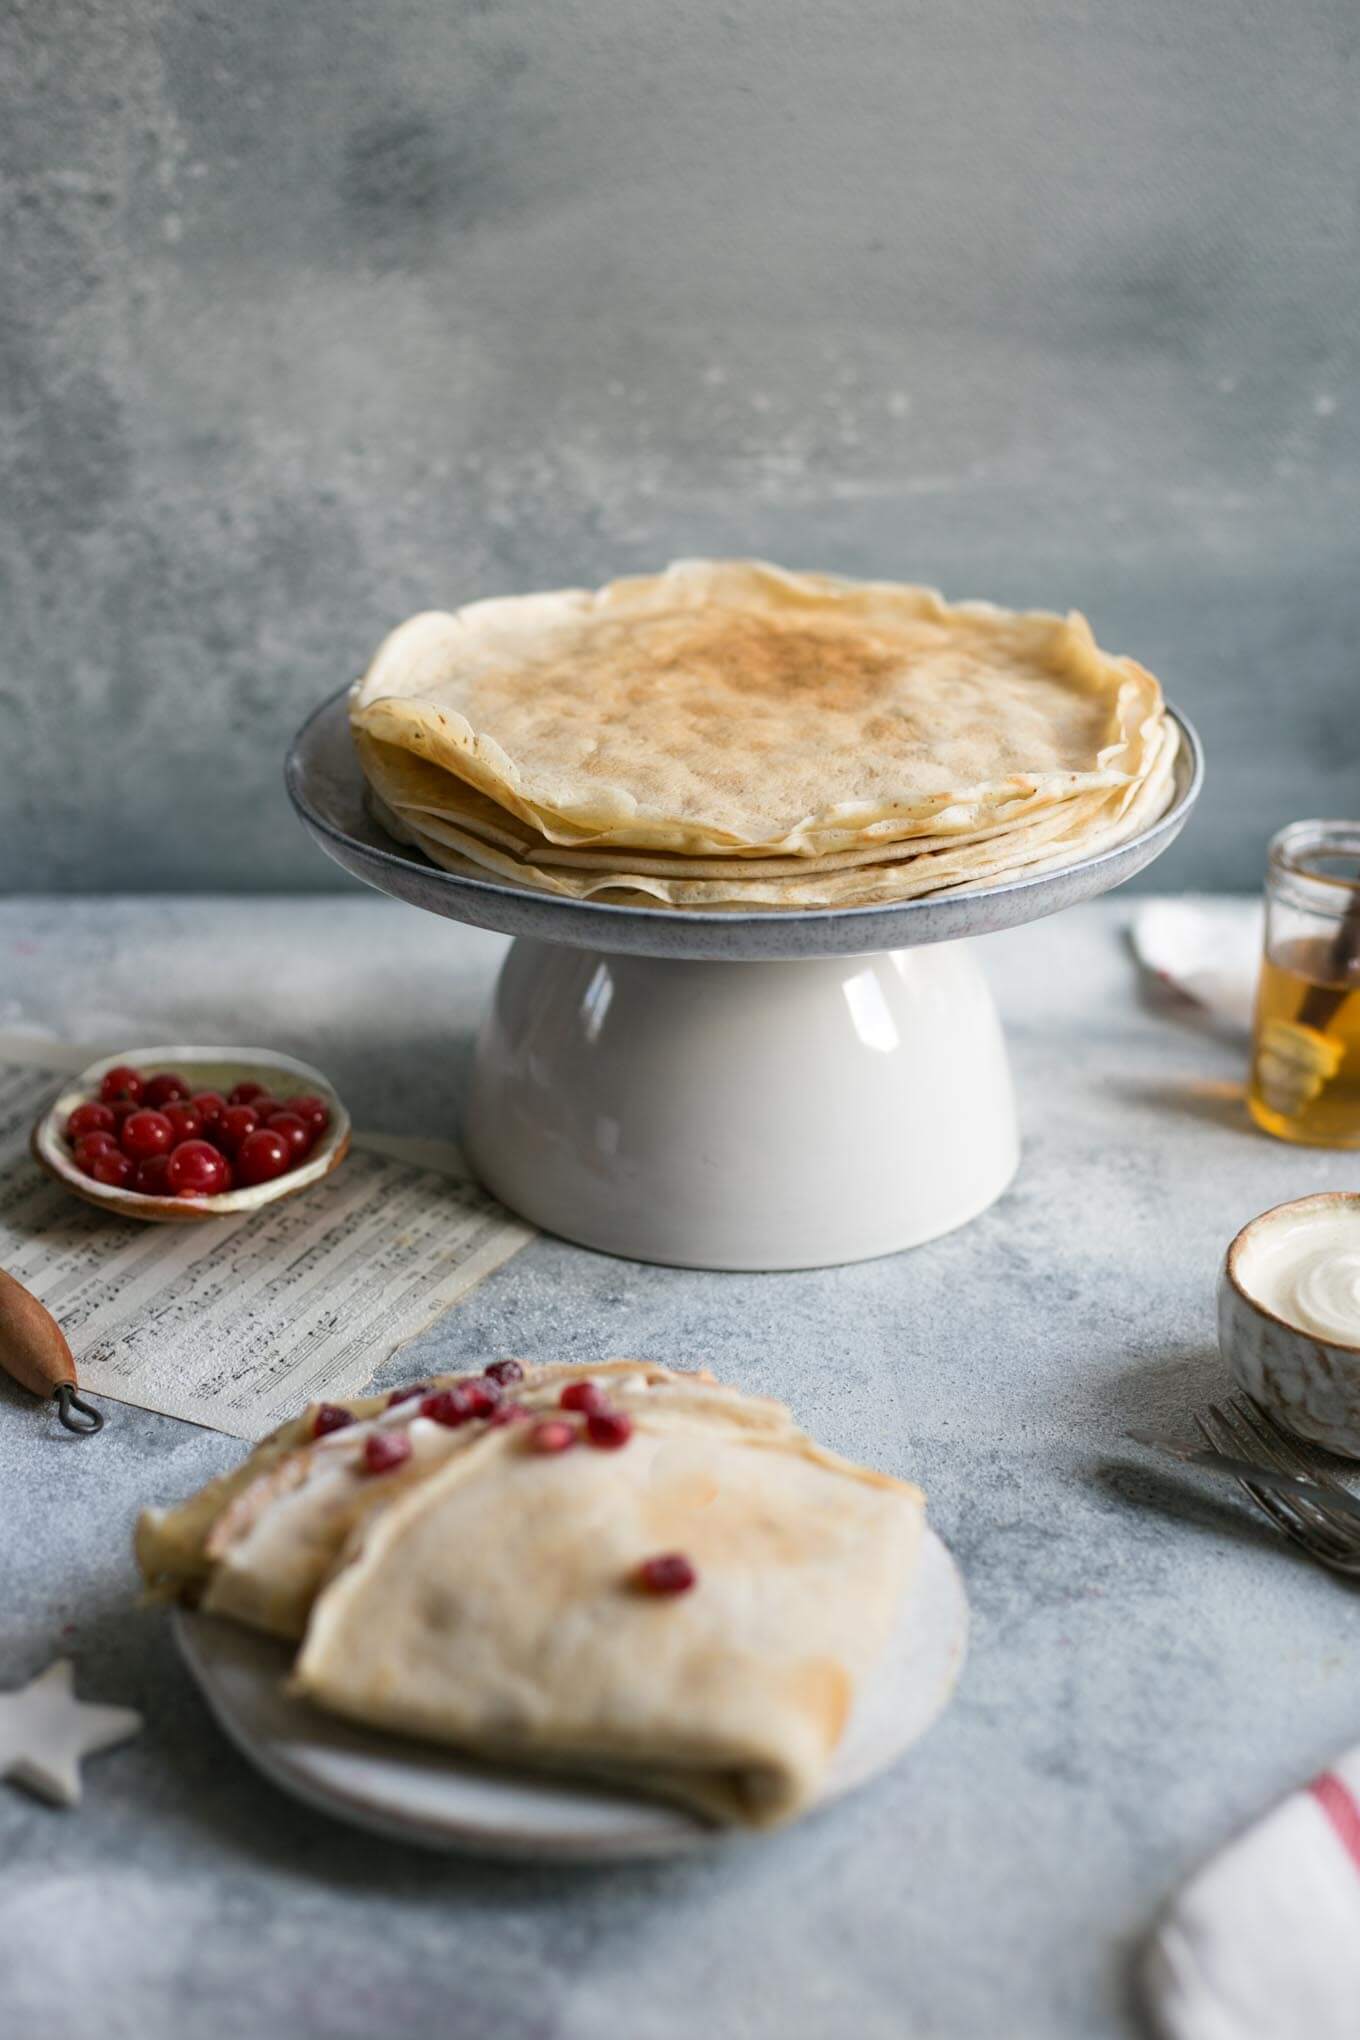 Delicious vegan french crepes recipe, perfect for breakfast or as a dessert #crepes #vegan #dairyfree | via @annabanana.co